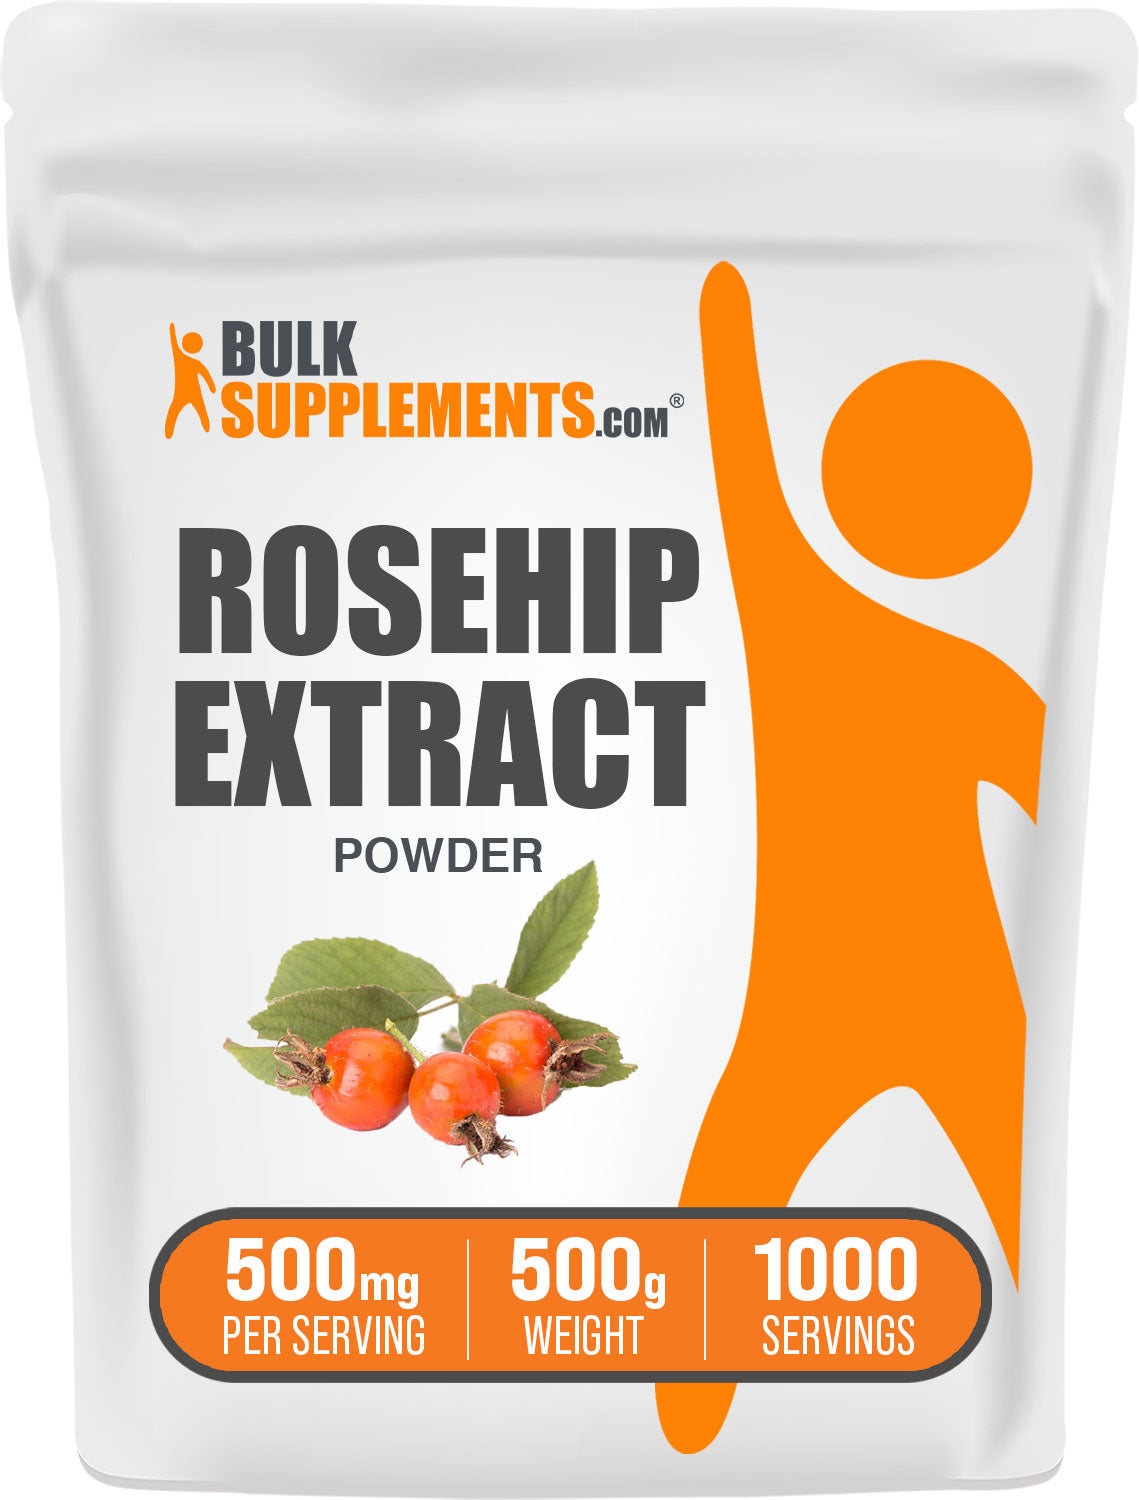 Rosehip Extract 500g Bag